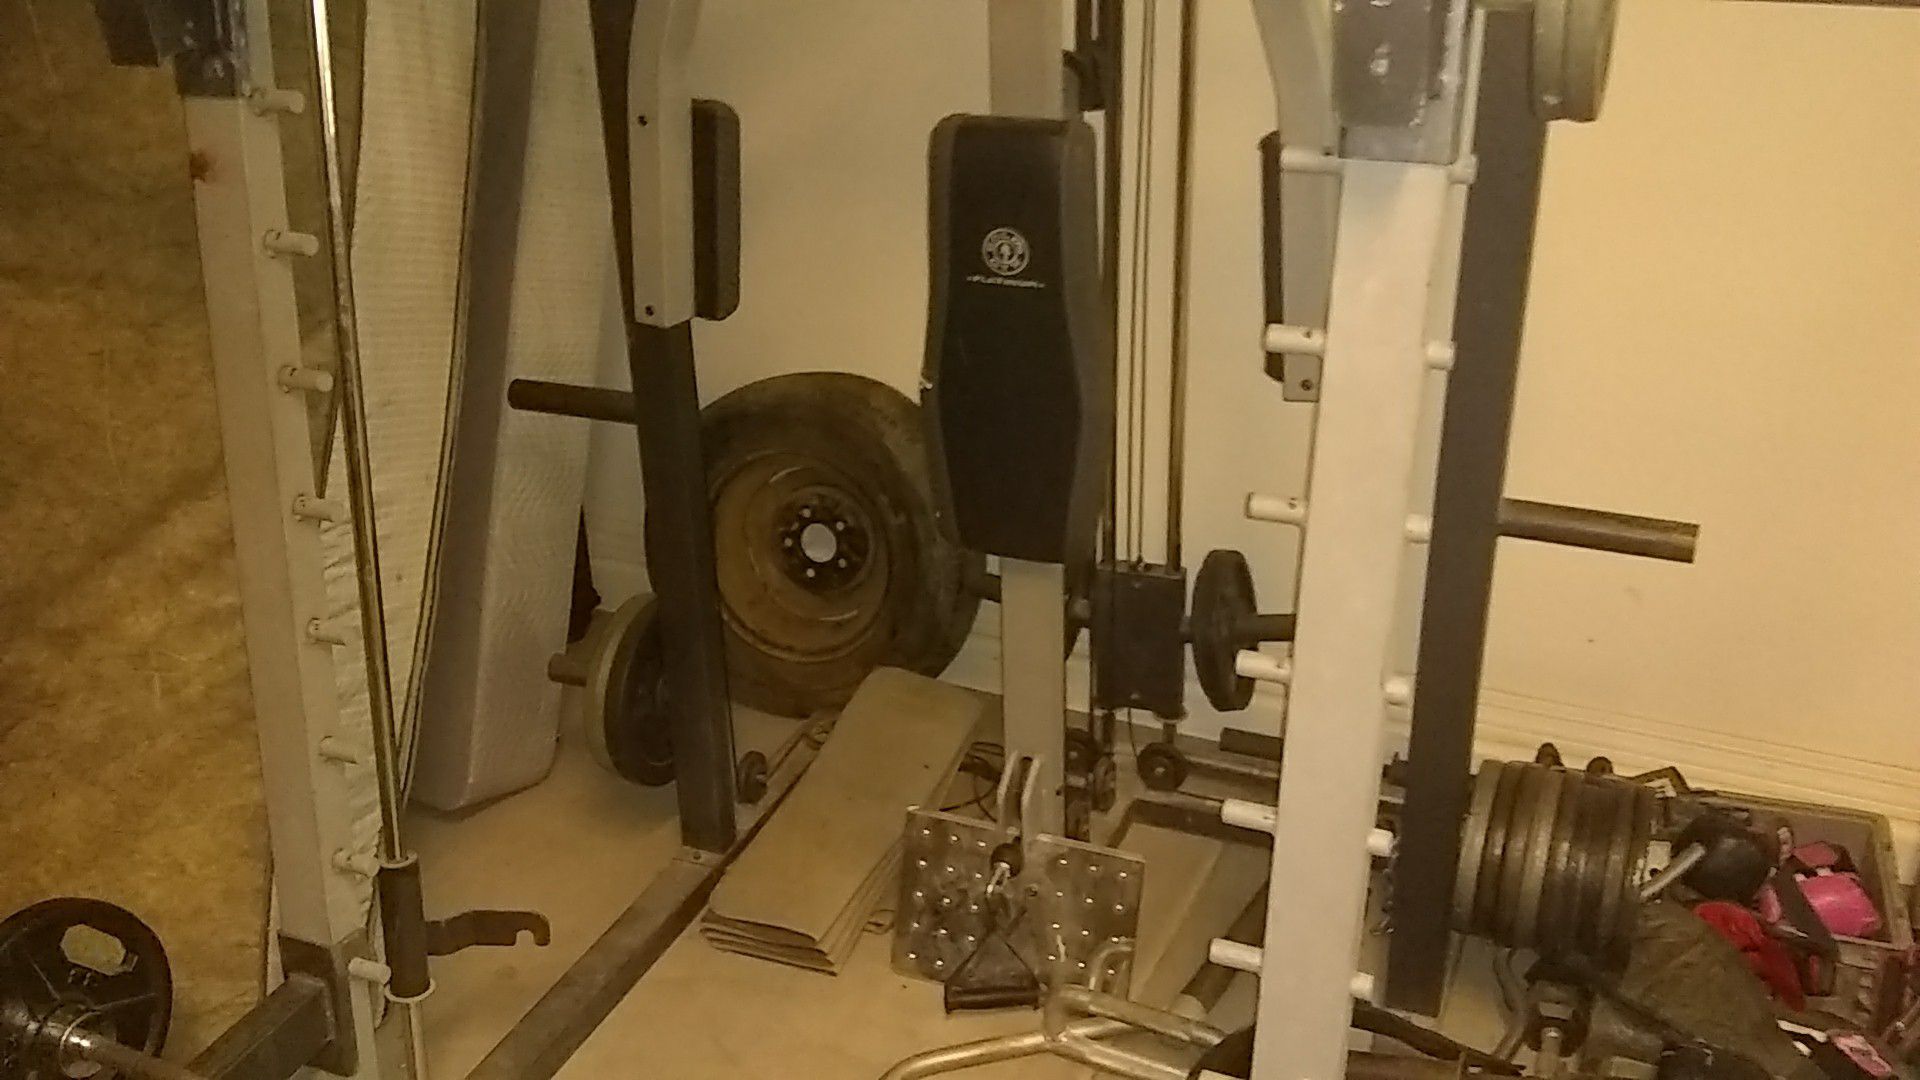 Gold gym Smith/ cable machine weights and barbell not included